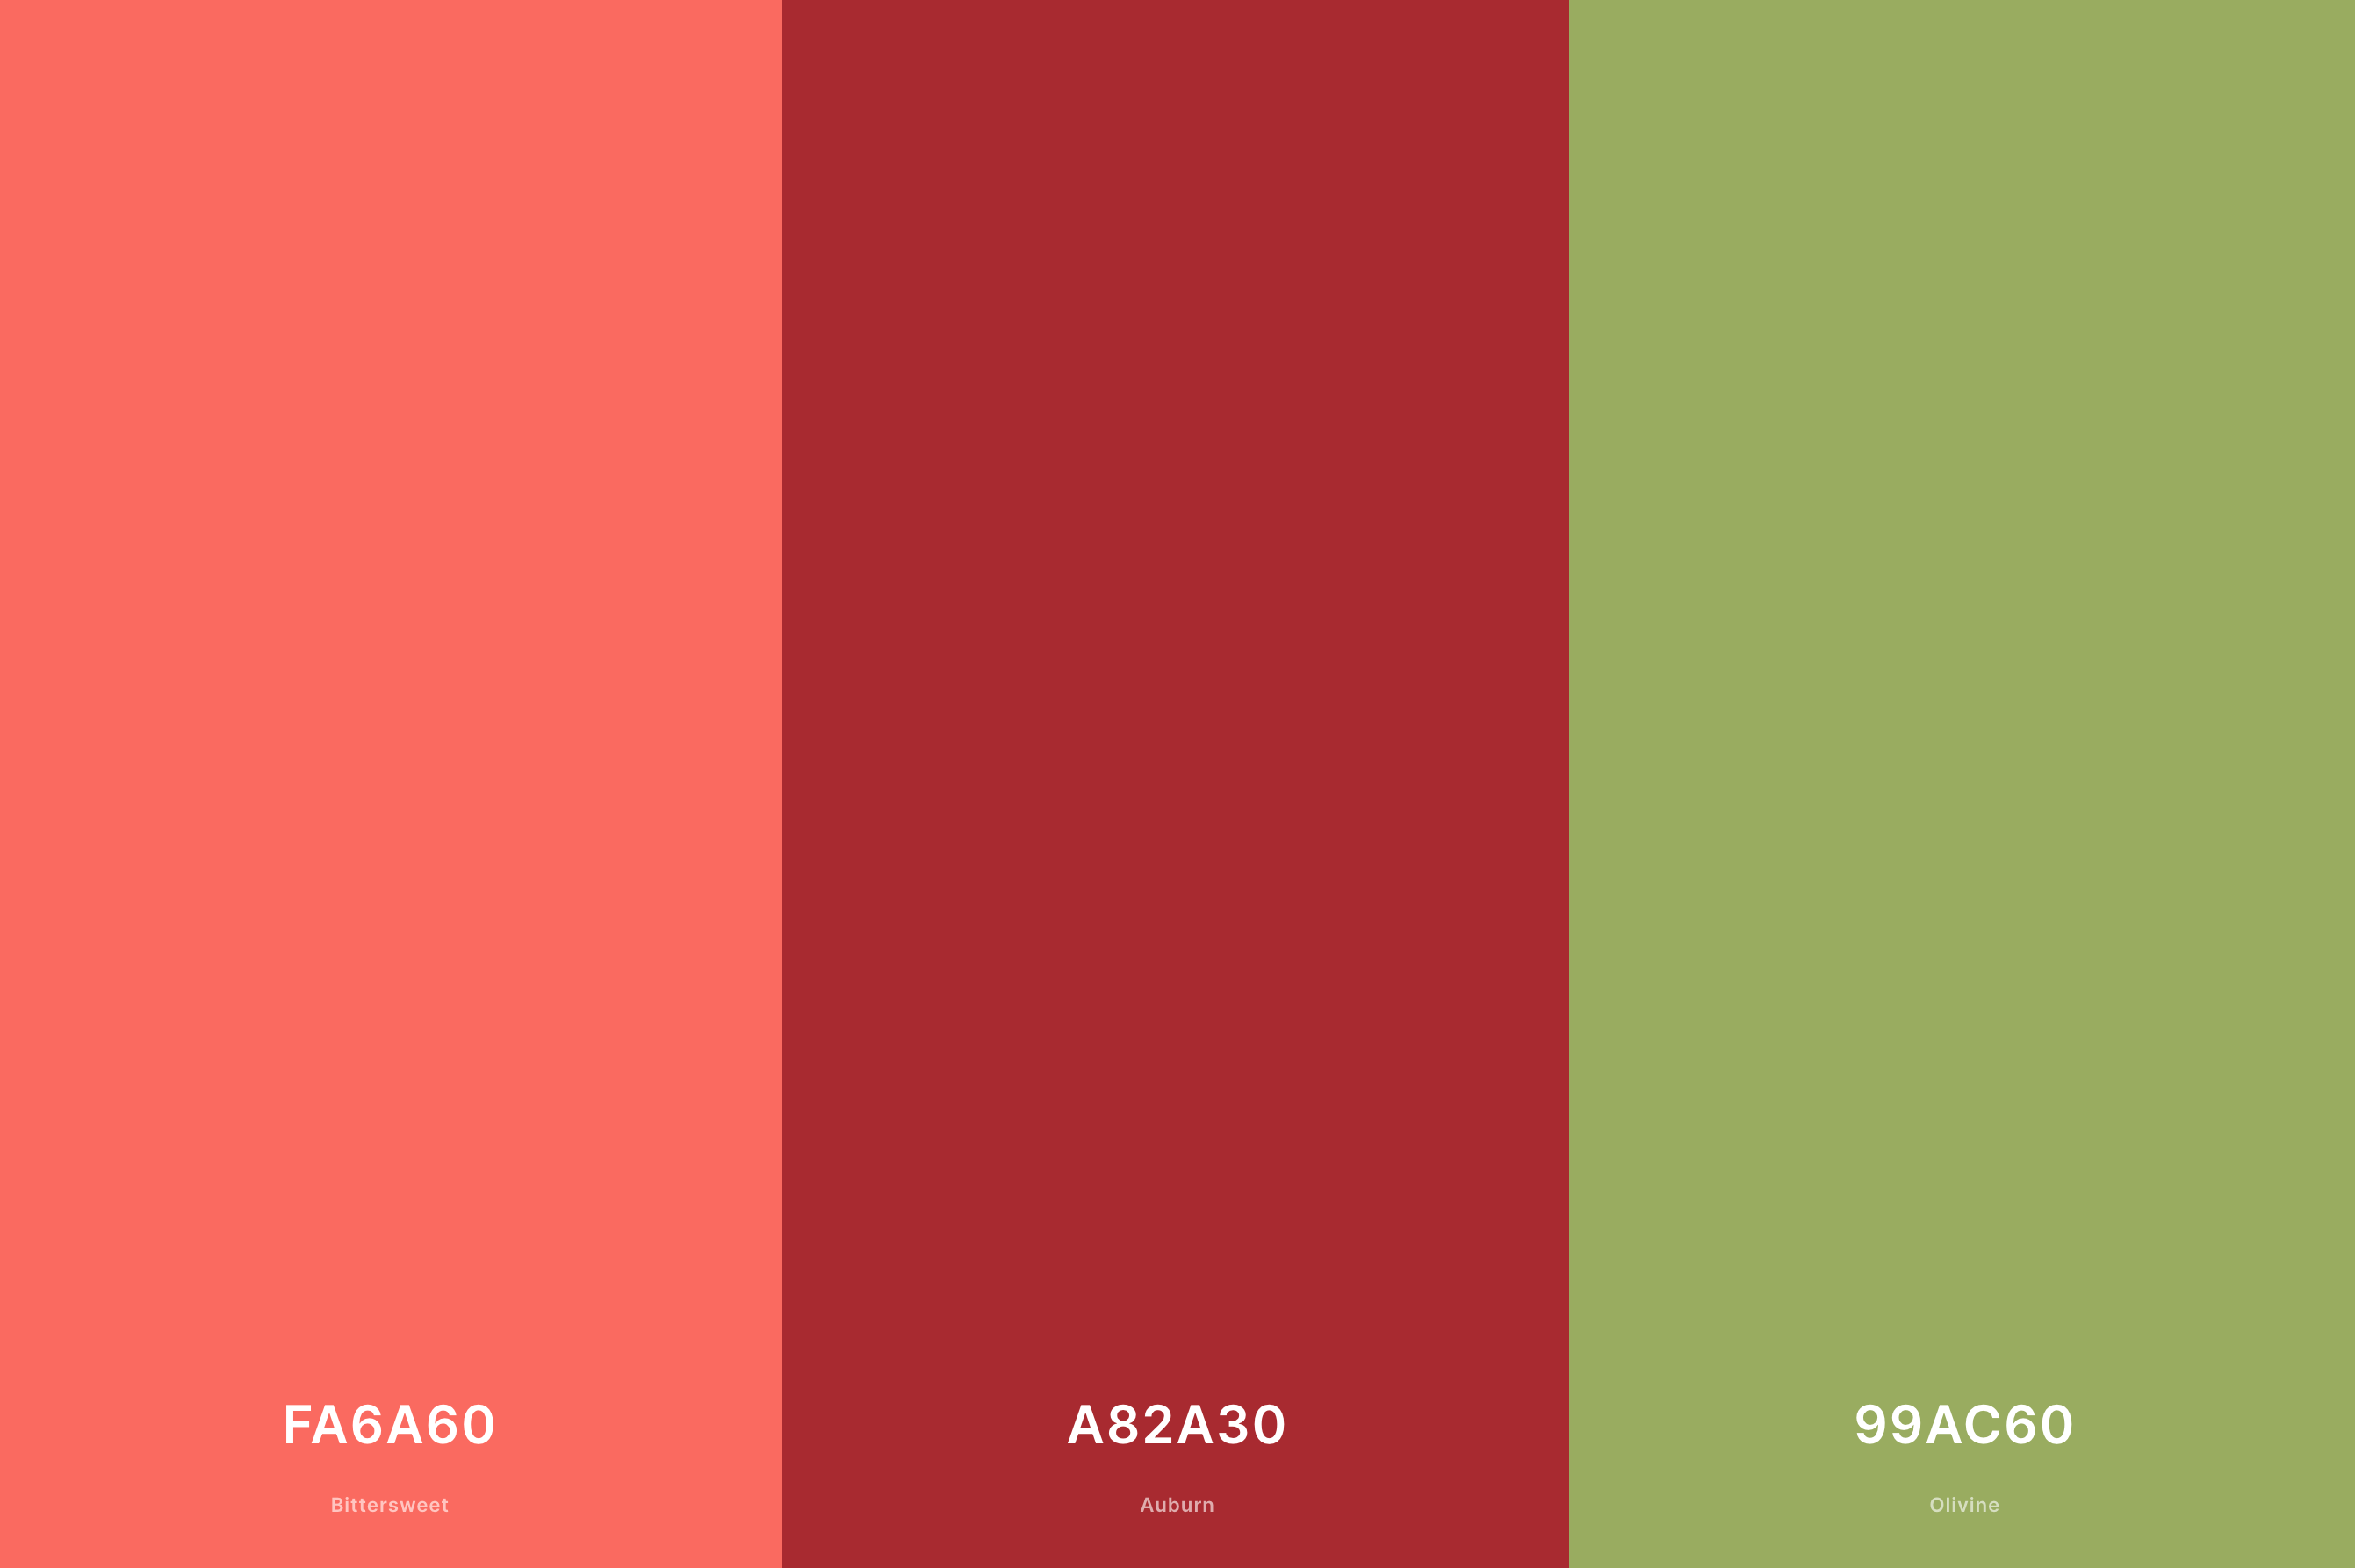 10. Red and Lime Green Christmas Palette Color Palette with Bittersweet (Hex #FA6A60) + Auburn (Hex #A82A30) + Olivine (Hex #99AC60) with Hex Codes